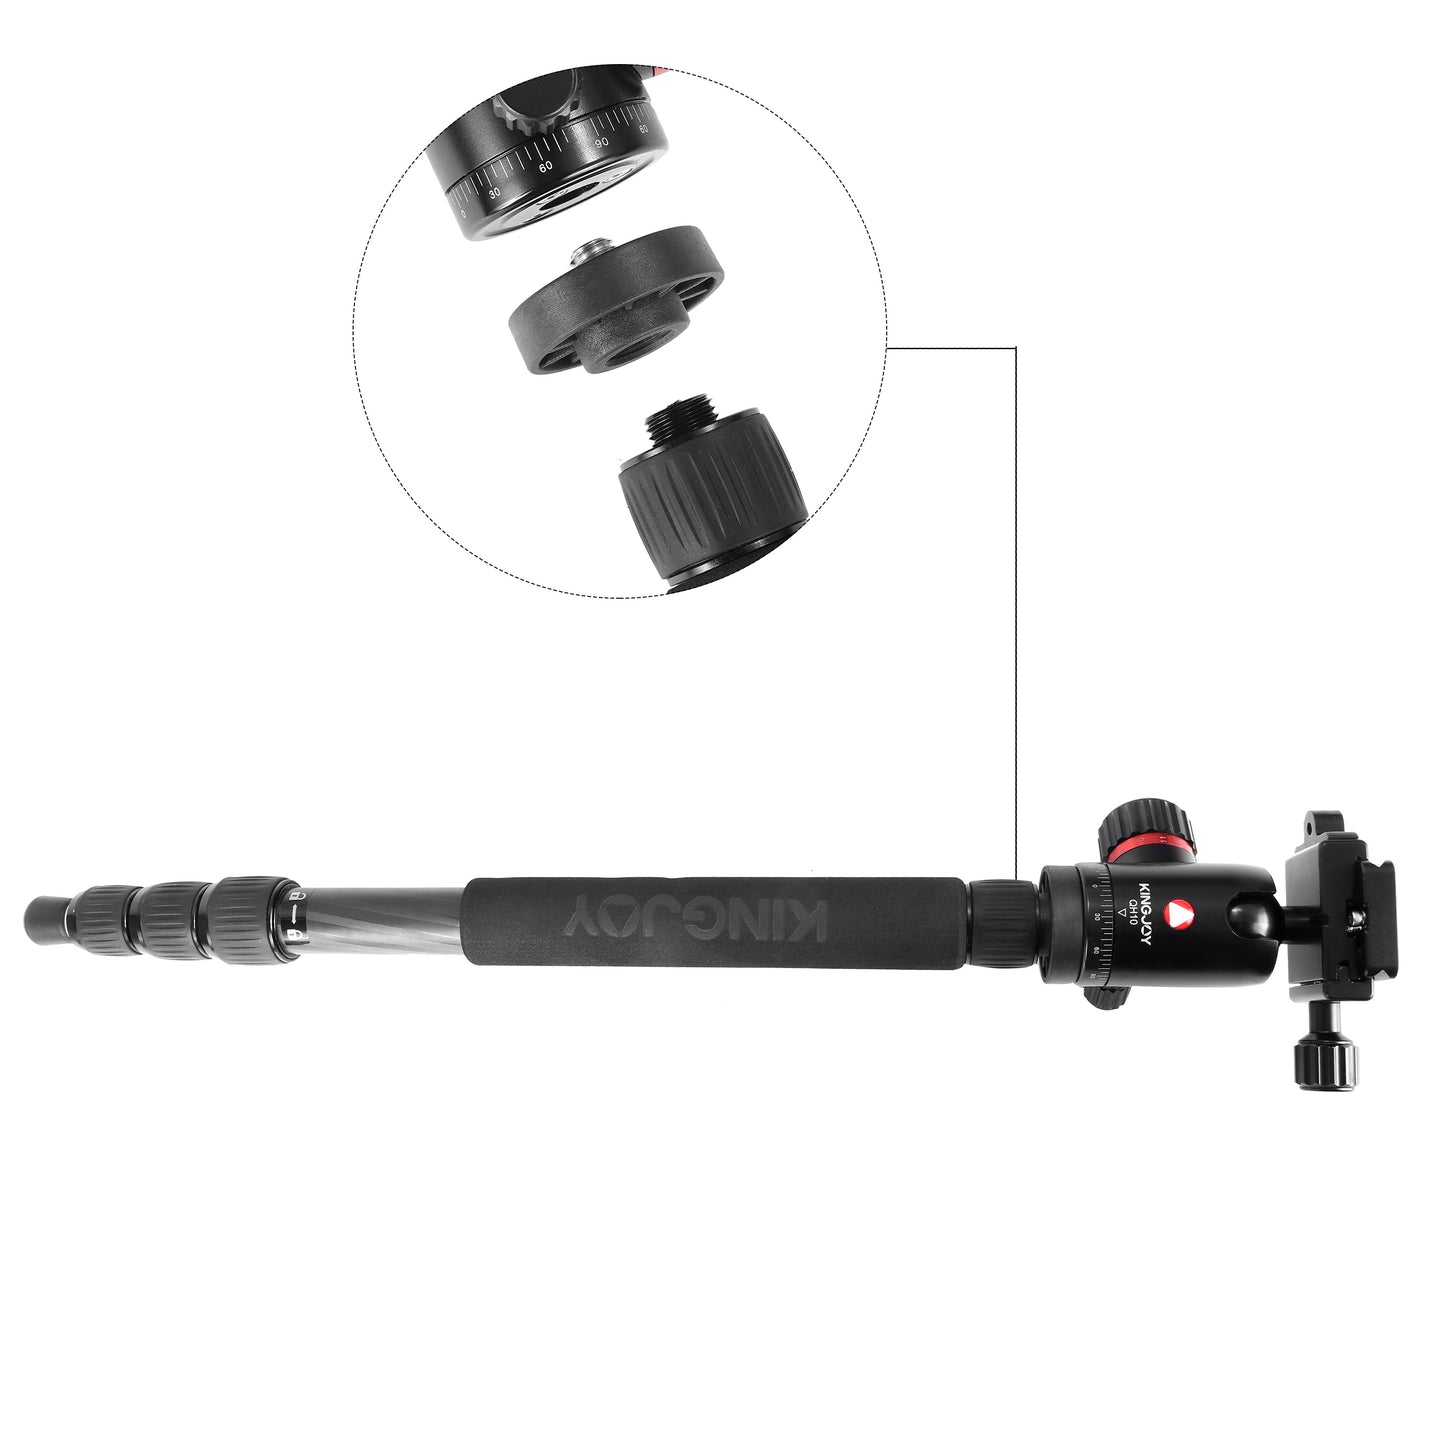 Kingjoy K1208 compact light traveling carbon fiber tripod with QH10 ball head-4 section, 60in, 3lbs, legs reverse fold